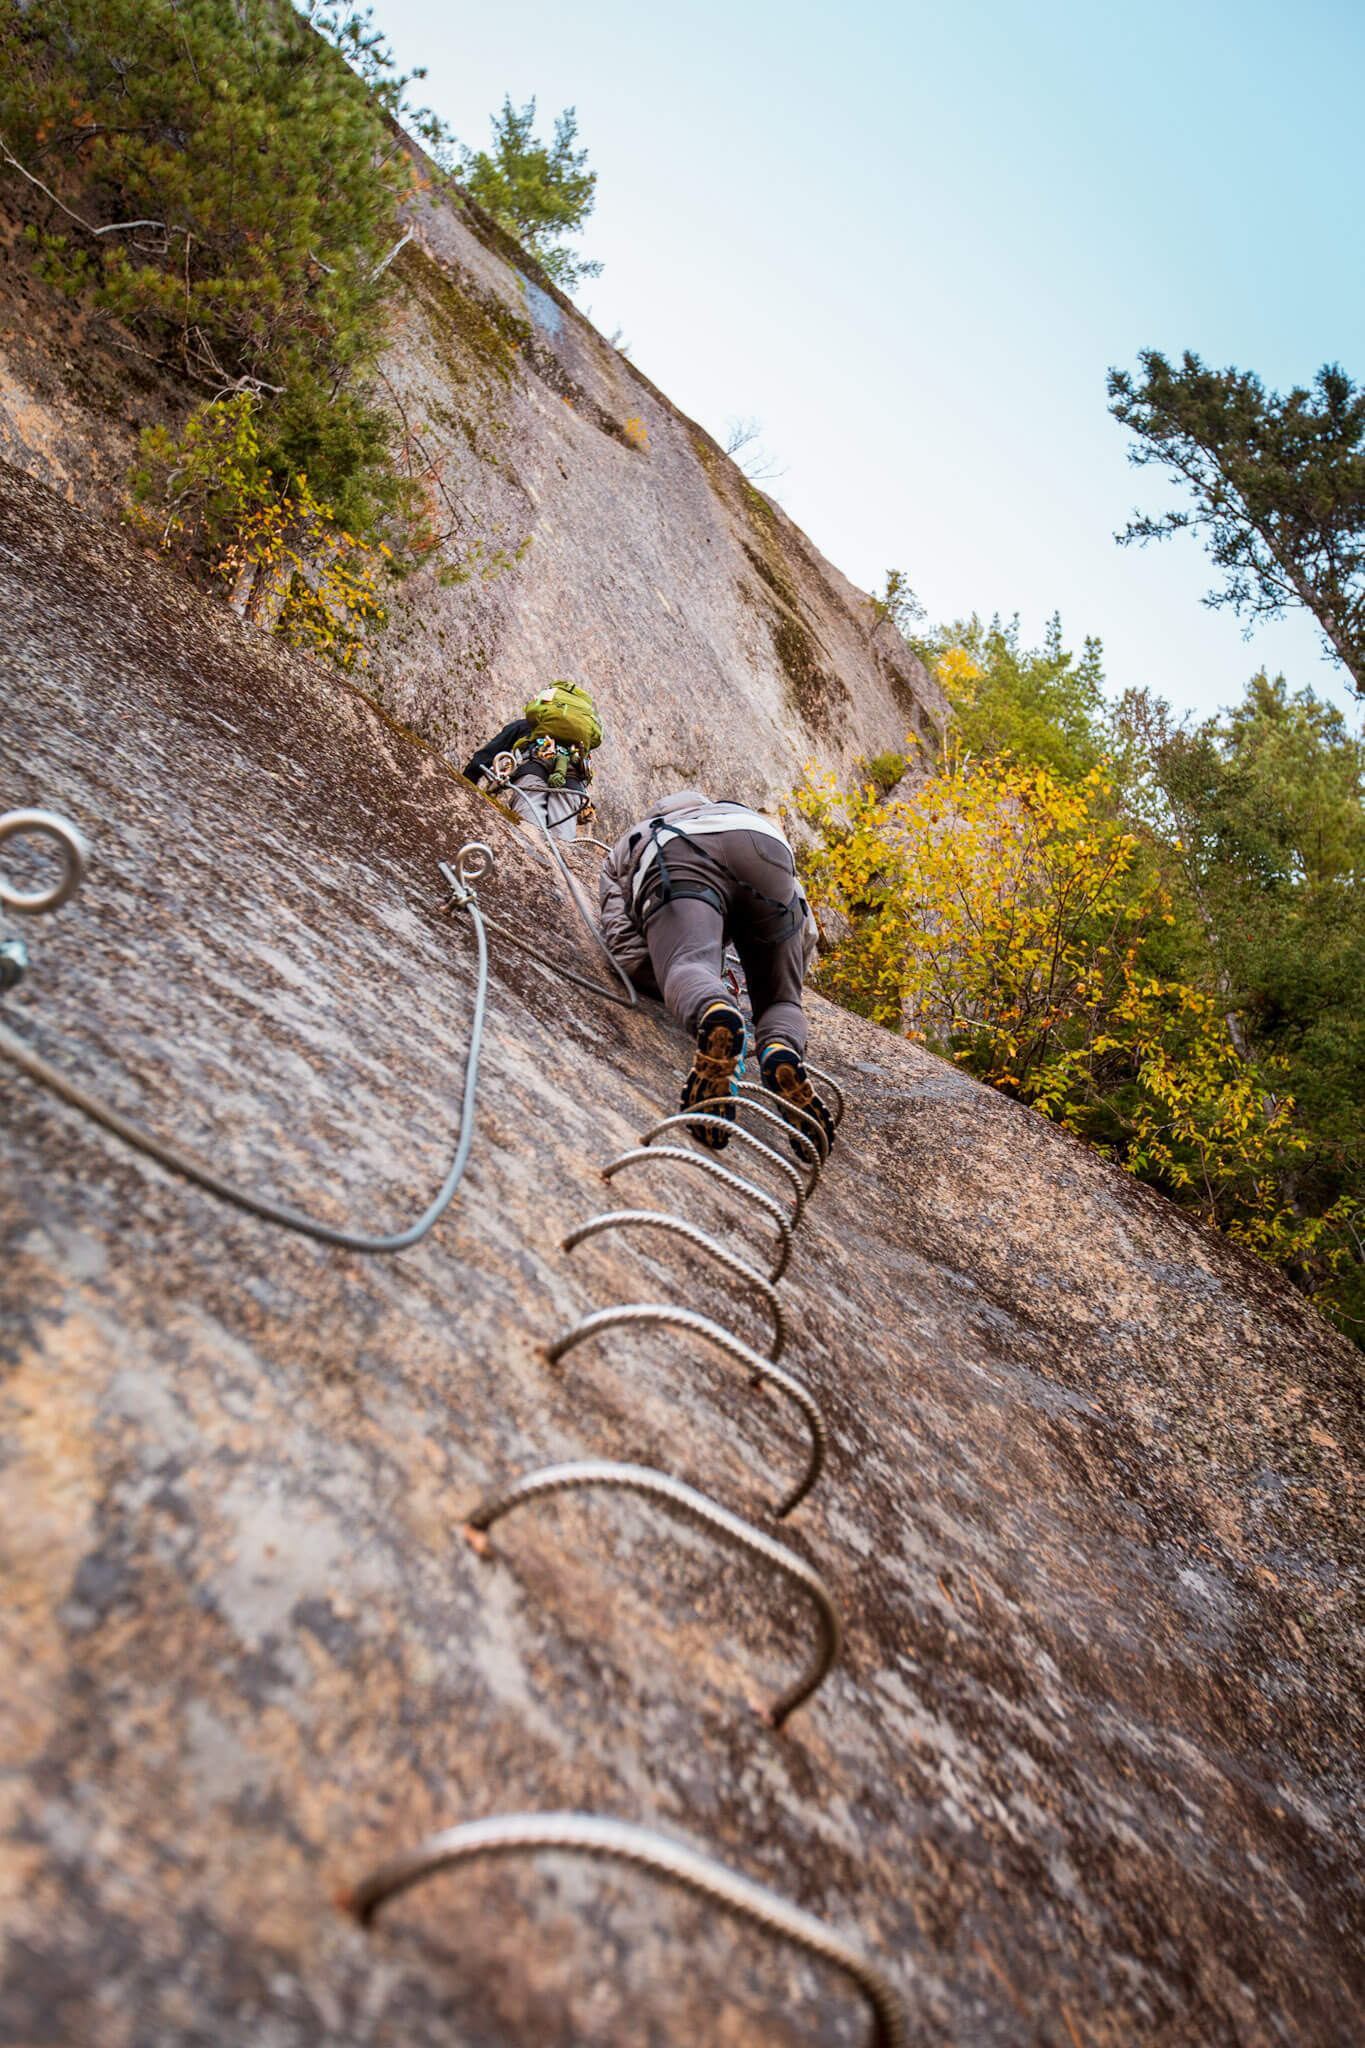 Rock climbers ascend a sheer cliff on a via ferrata route in the Saguenay Fjord National Park